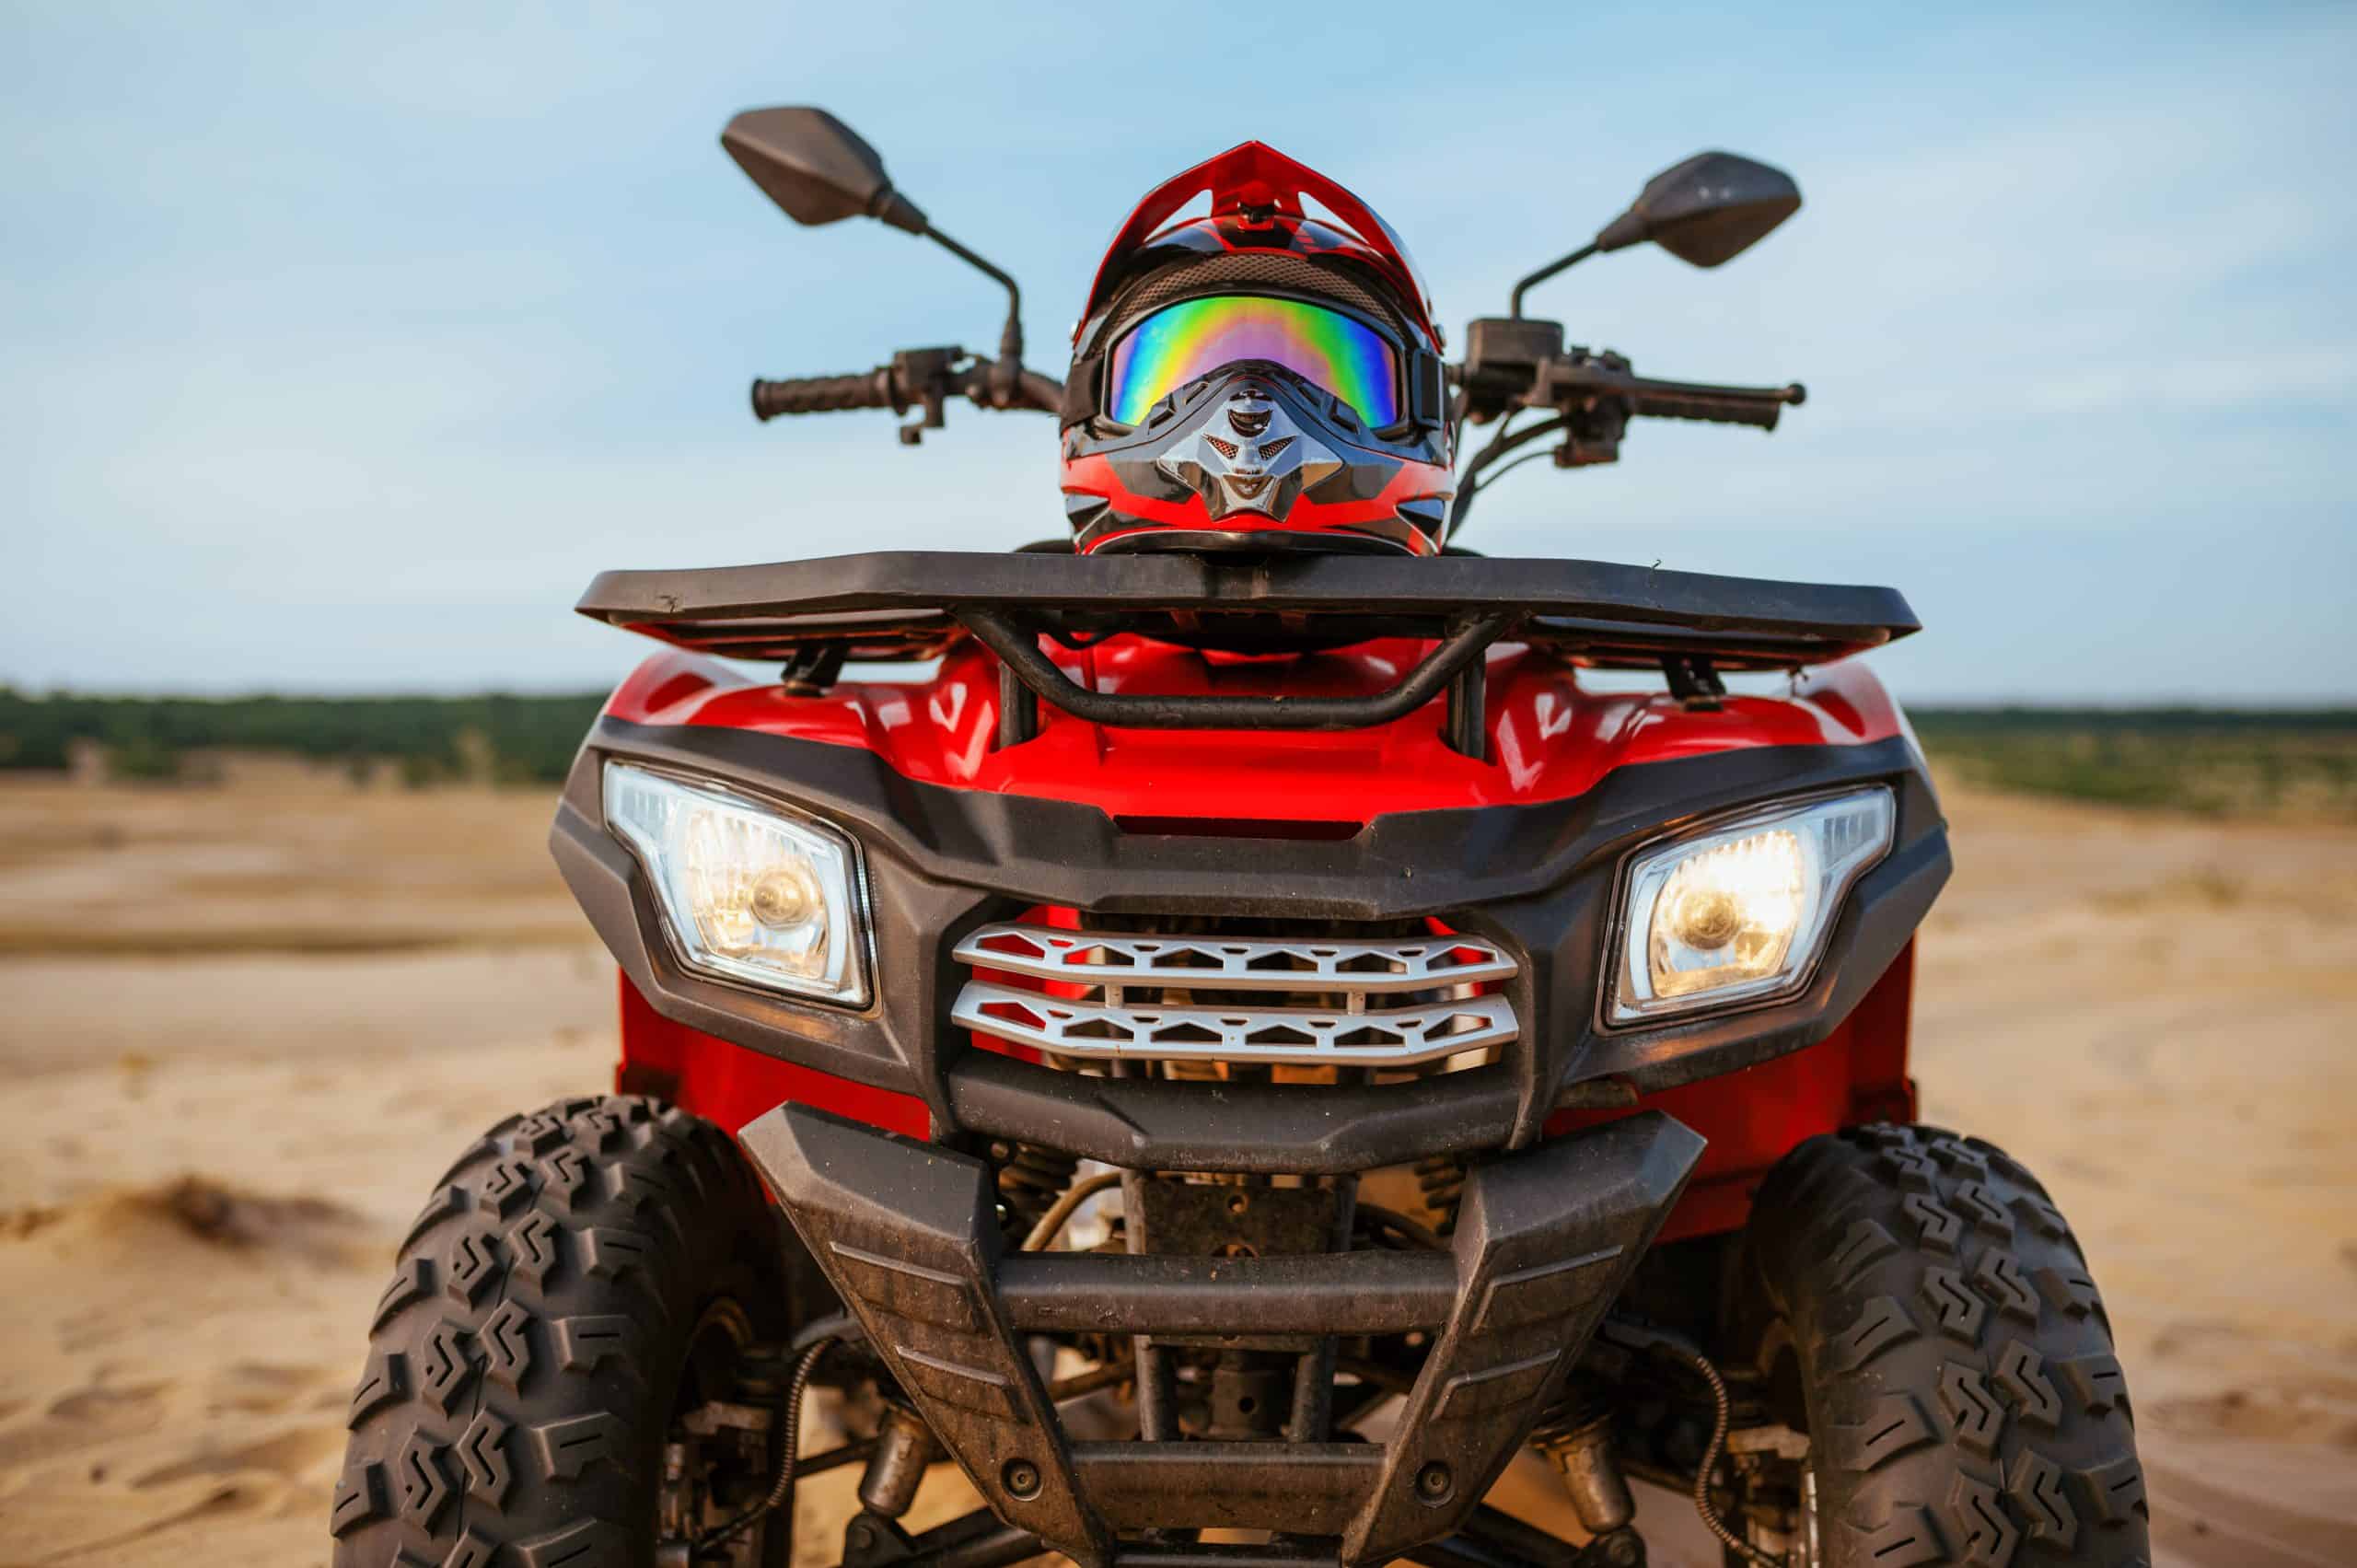 What to Wear During ATV Riding